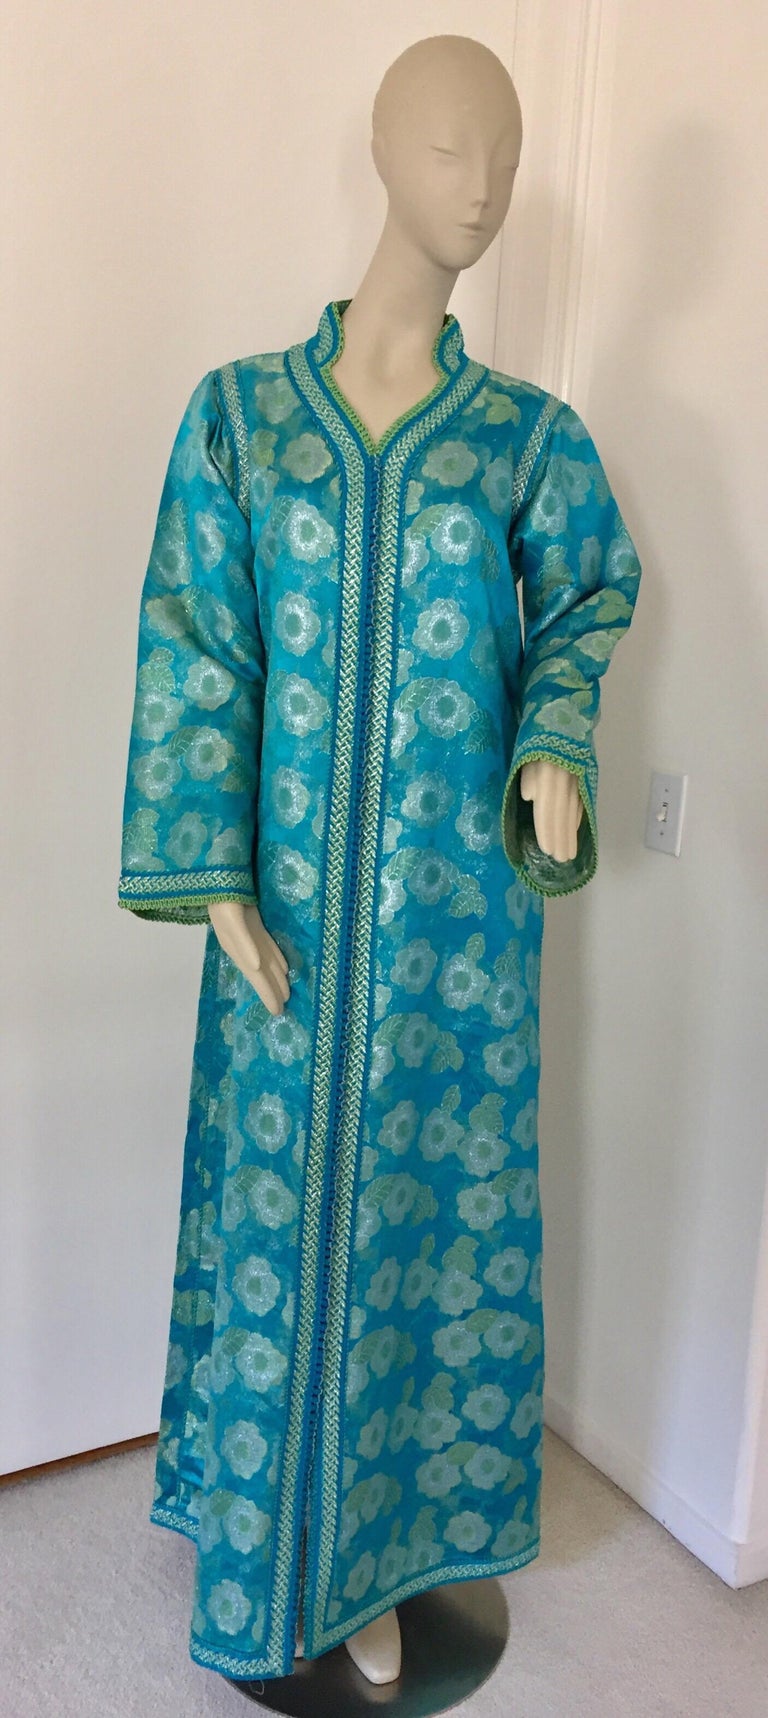 Elegant Moroccan caftan in turquoise and gold floral lame metallic and embroidered trim,
circa 1970s.
This long maxi dress kaftan is embroidered and embellished entirely by hand.
It’s crafted in Morocco and tailored for a relaxed fit.
One of a